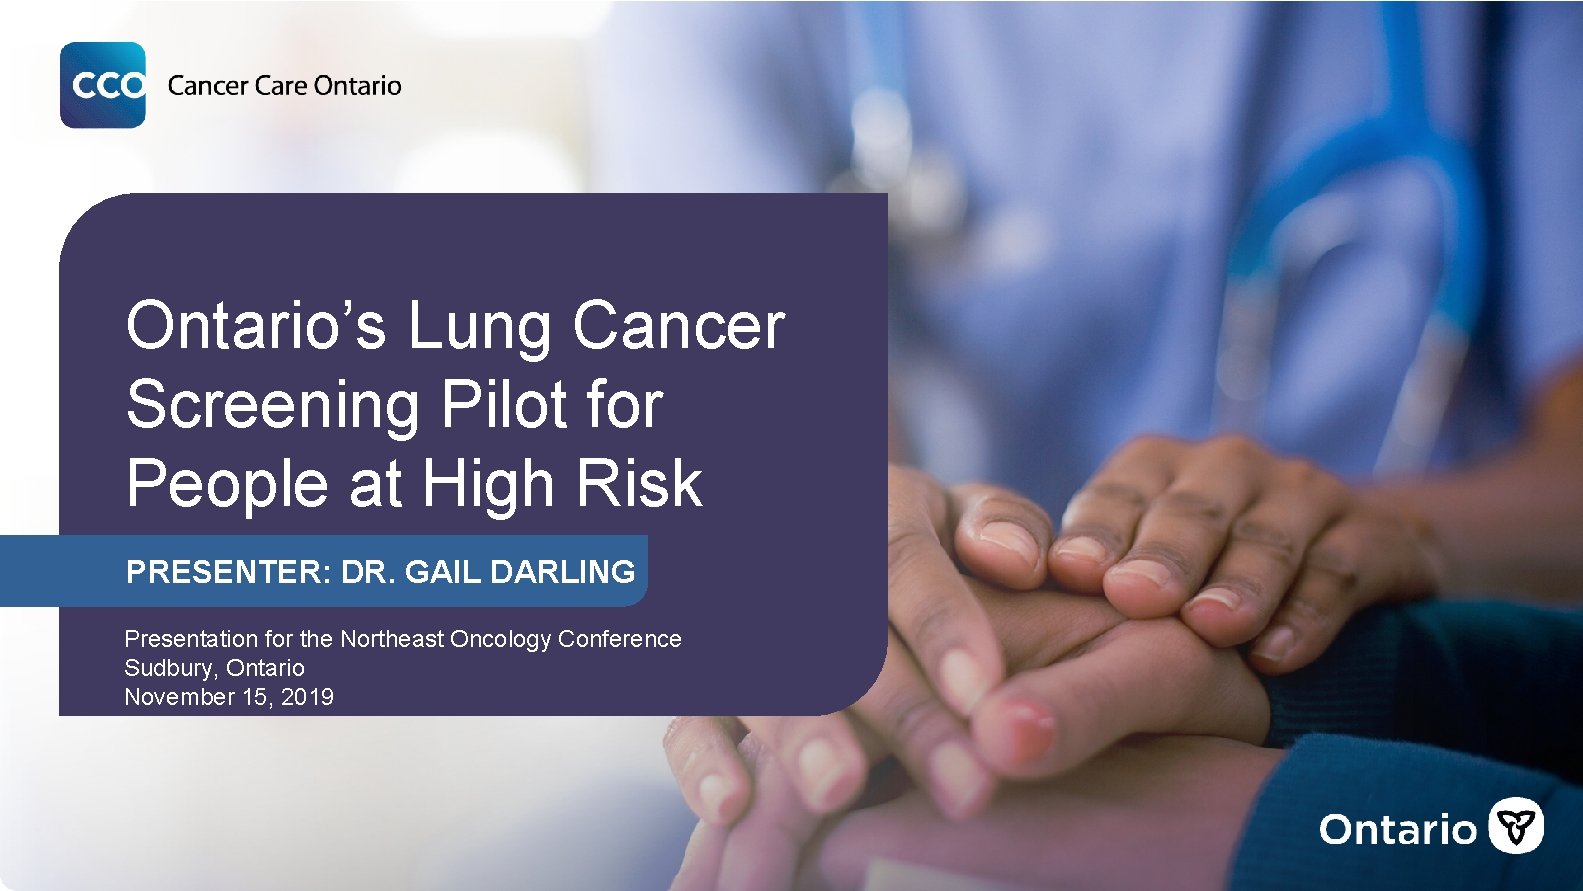 Ontario’s Lung Cancer Screening Pilot for People at High Risk PRESENTER: DR. GAIL DARLING